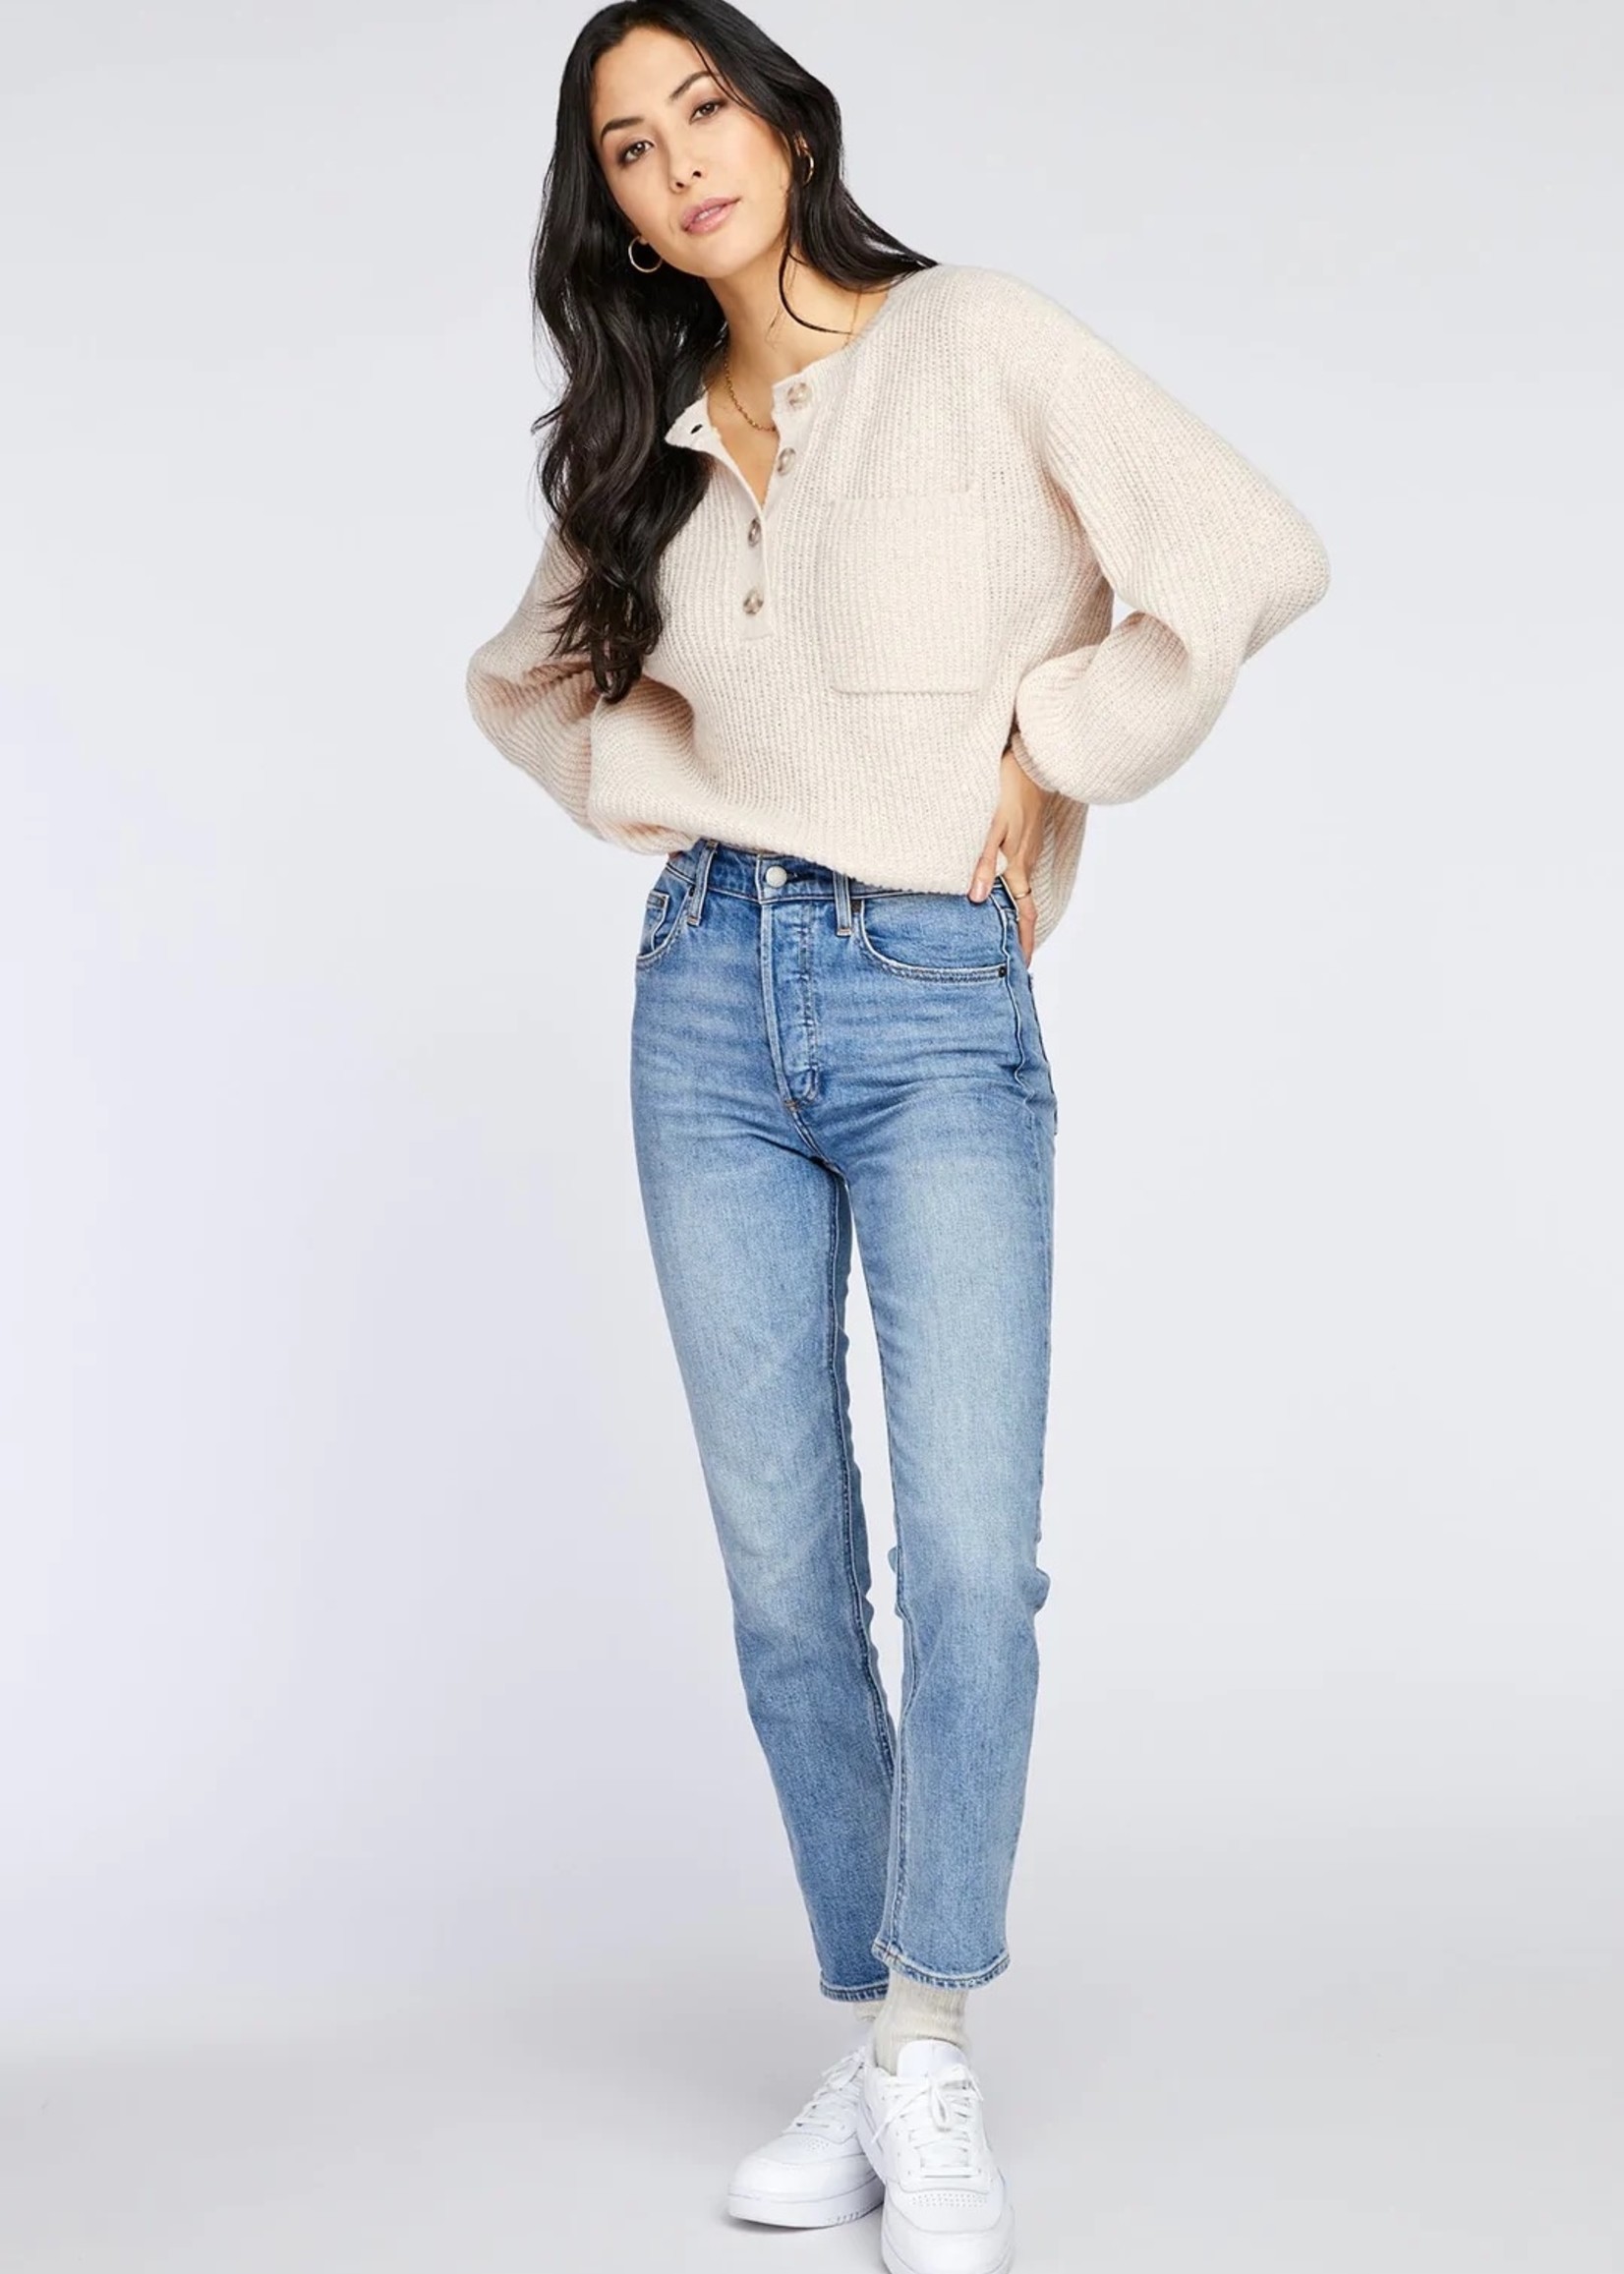 Gentle Fawn Robinson Pullover